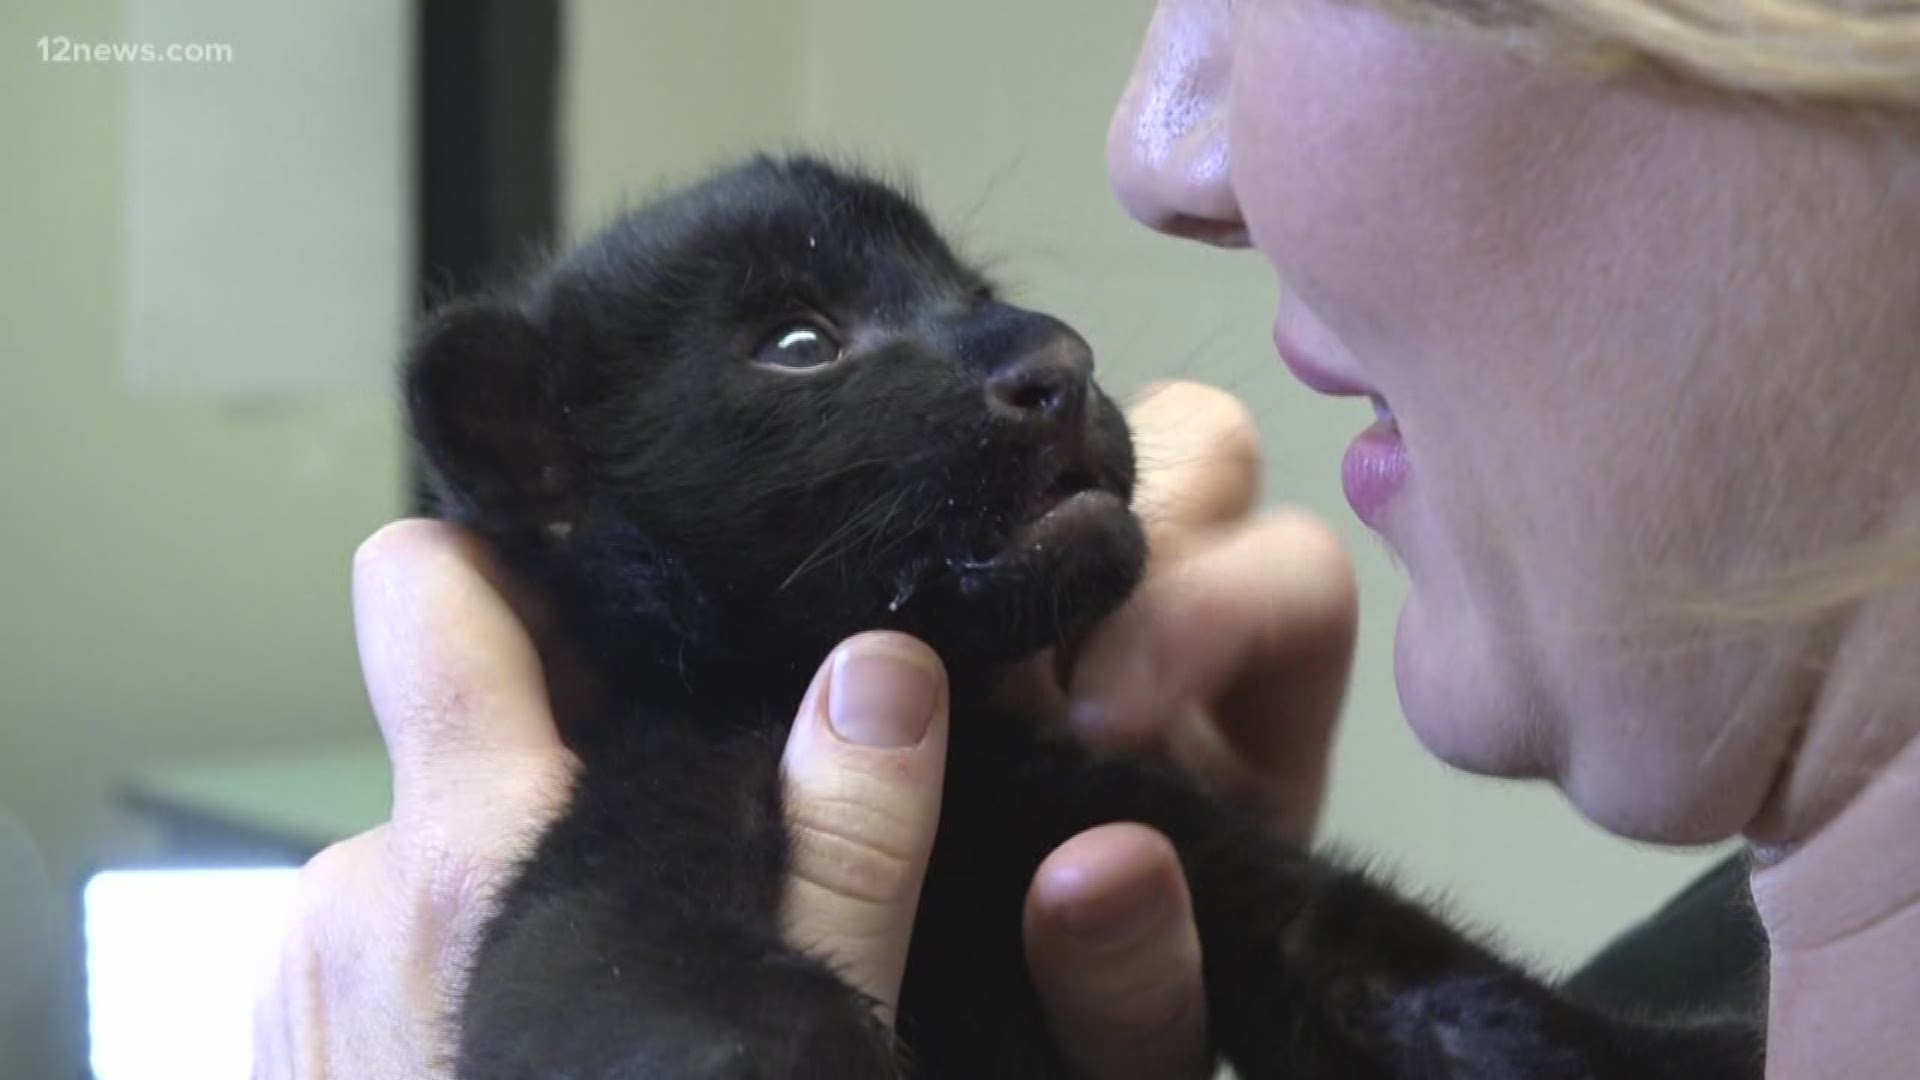 The zoo said Sara's cub is "receiving around-the-clock care" and enjoys bottles "several times a day."